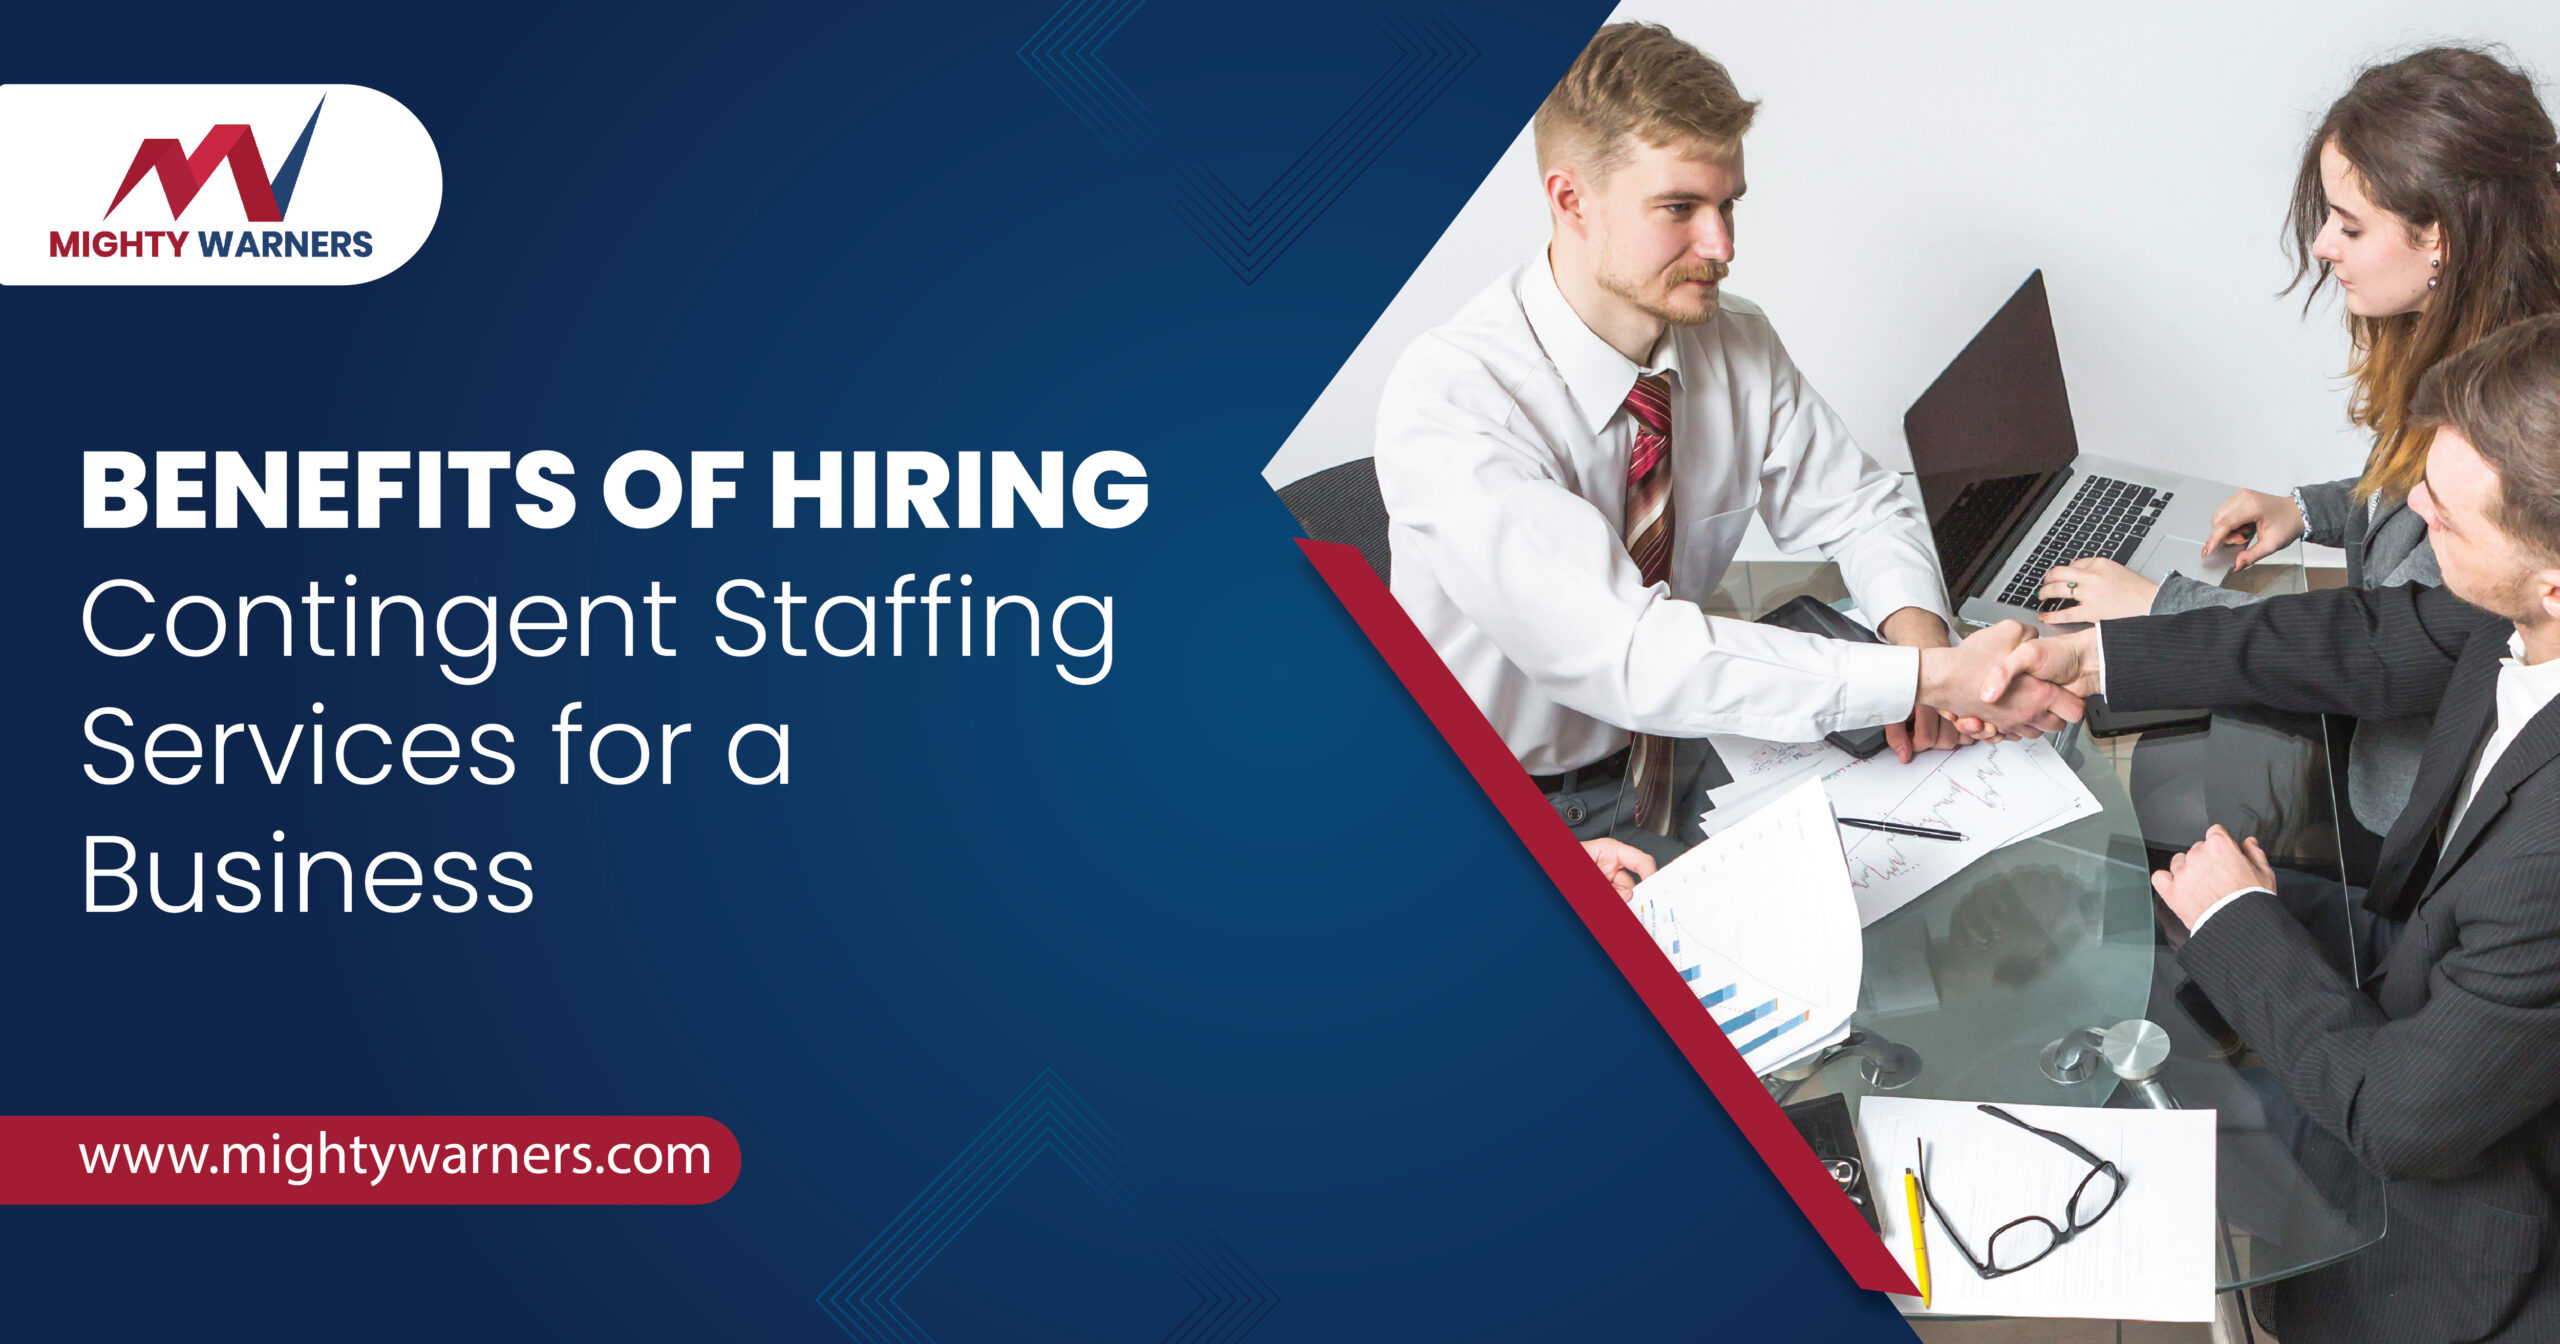 Top Benefits of Hiring Contingent Staffing Services for a Business